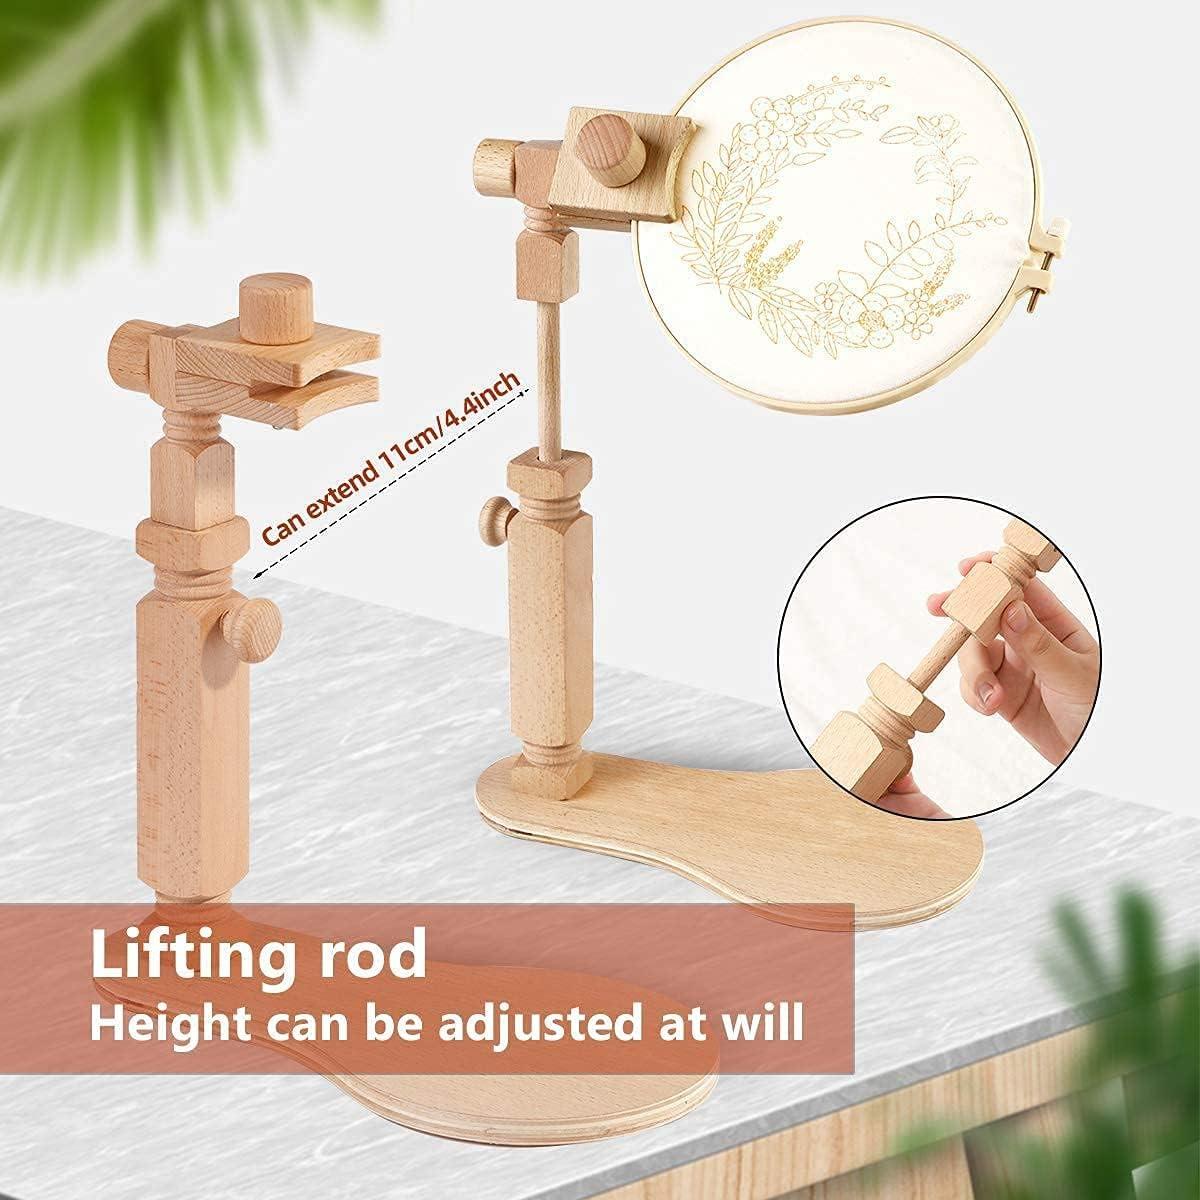 Embroidery Hoop Stand - Rotated Cross Stitch Stand Lap, Easy to Use Natural  Beech Wood Embroidery Hoop Holder, Hands Free Cross Stitch Stand for Art